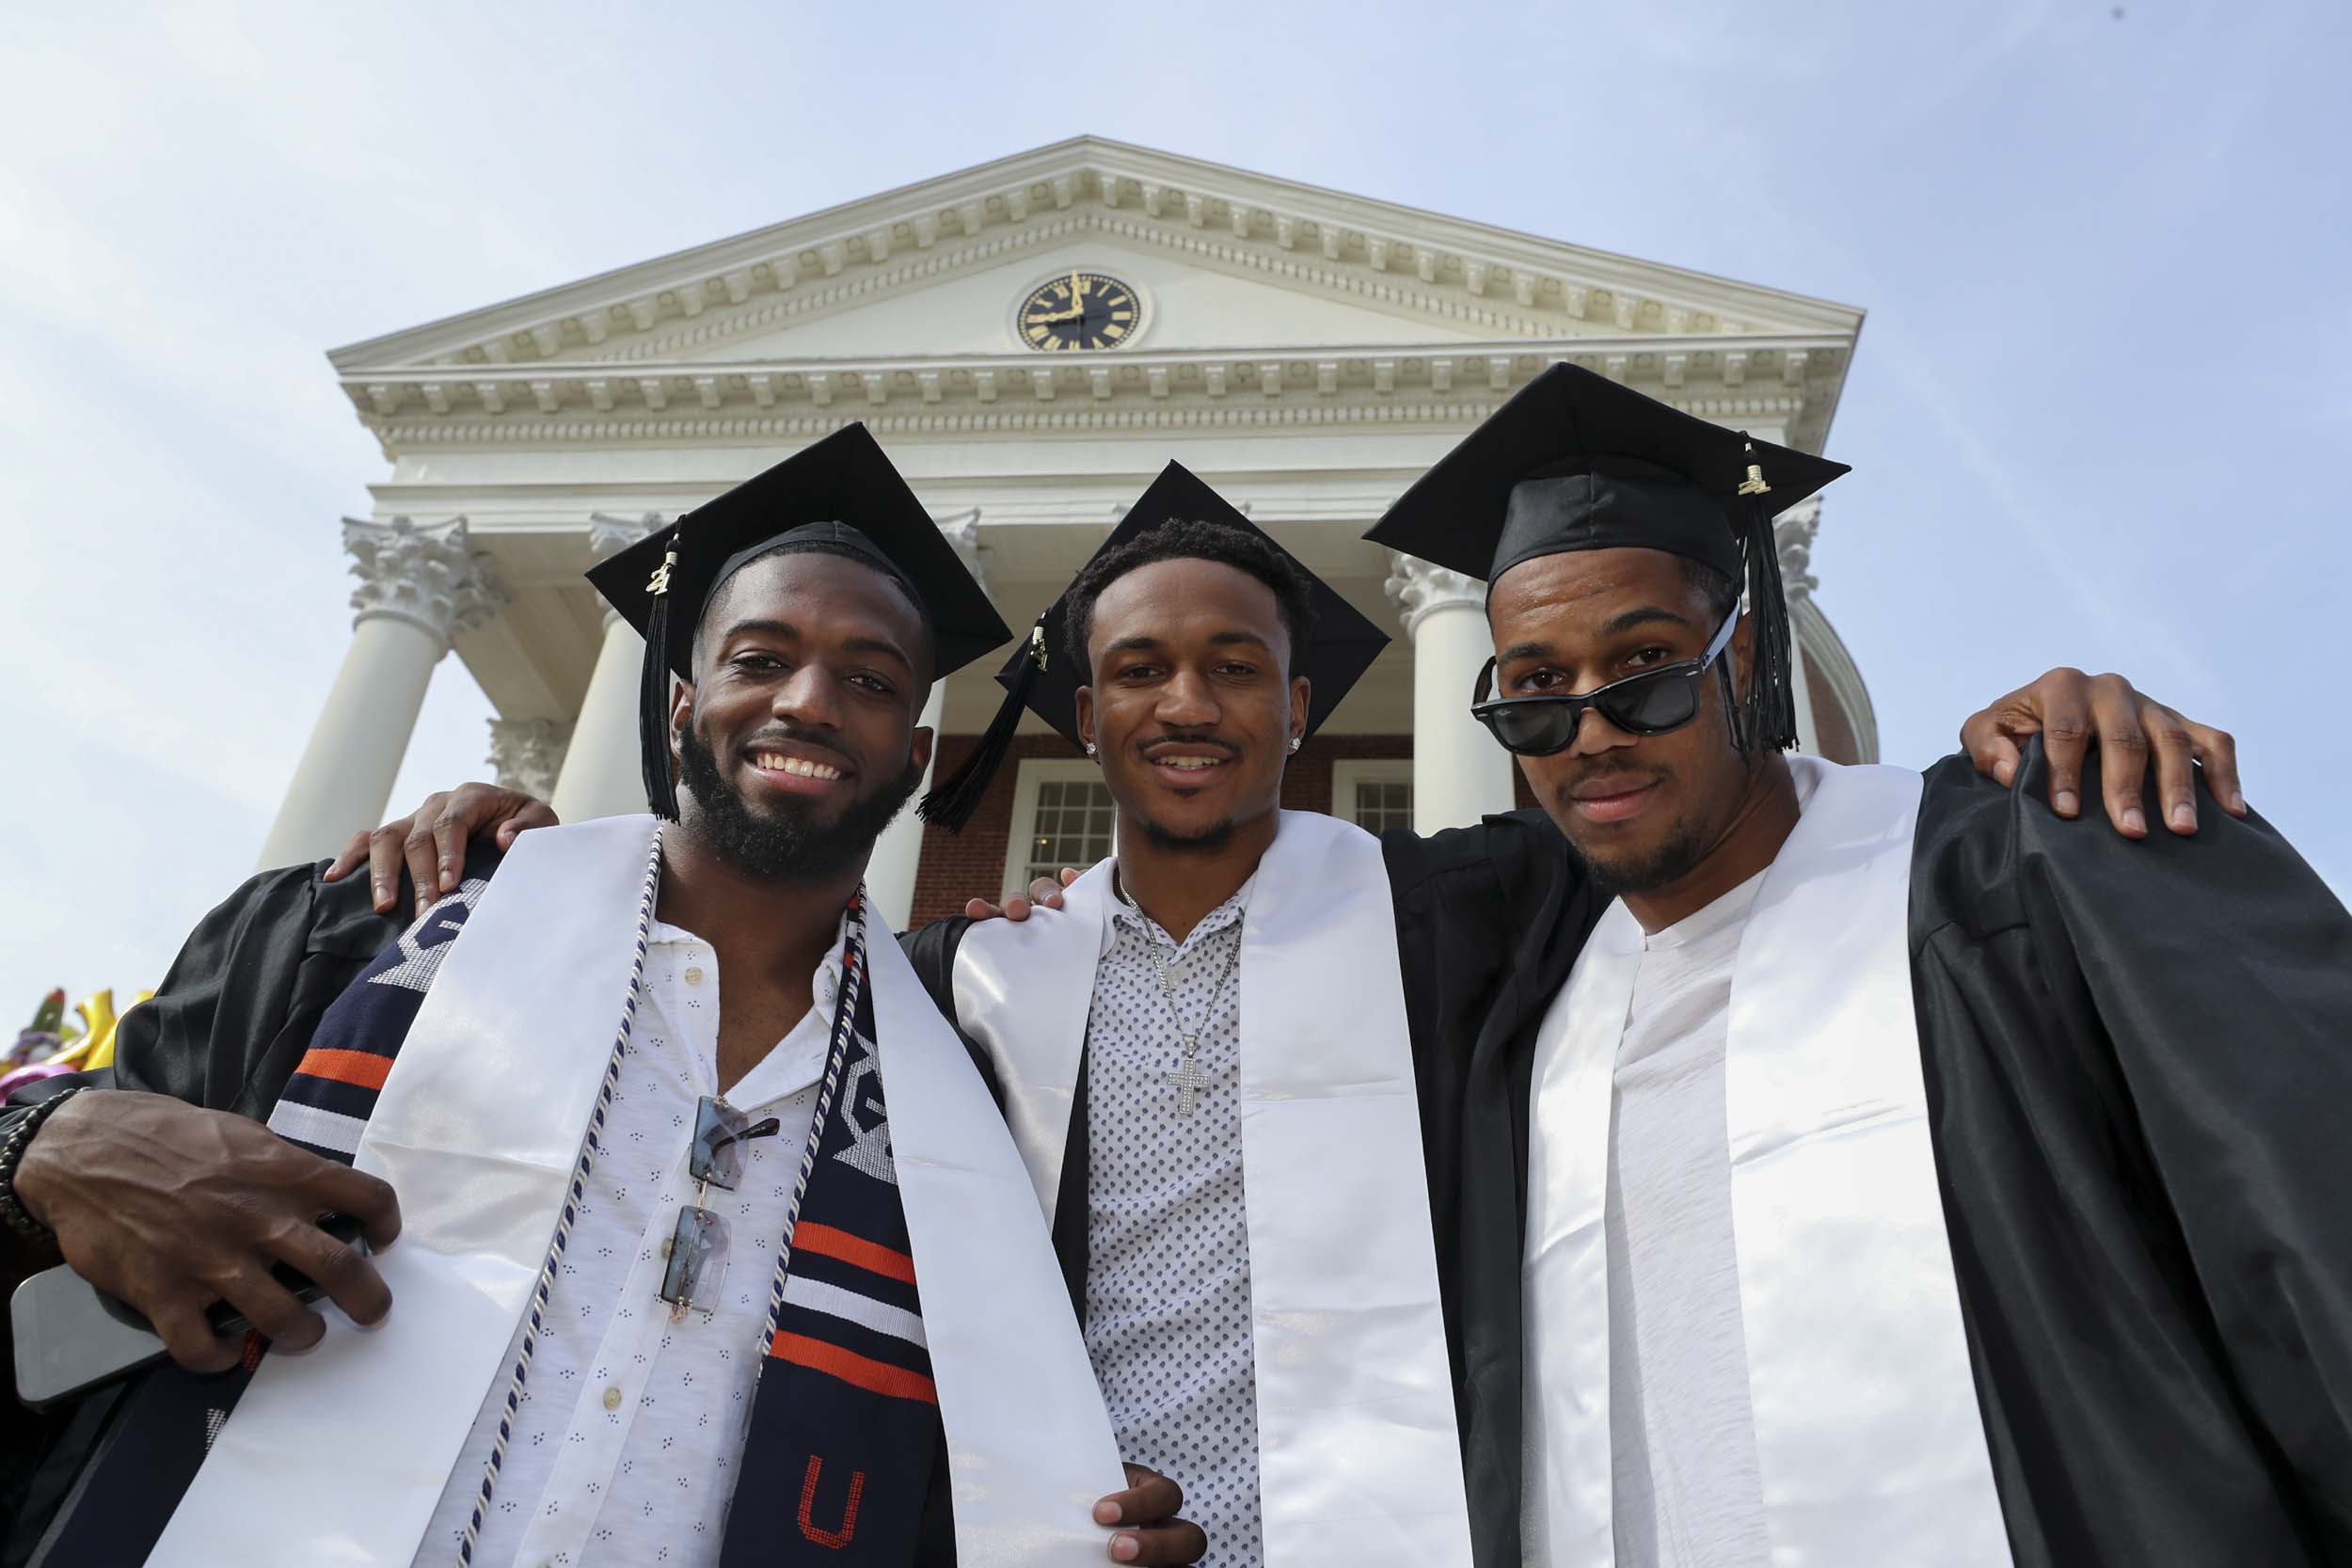 Three graduates stand in front of the Town Hall building wrapping their arms around each other shoulders for a picture.